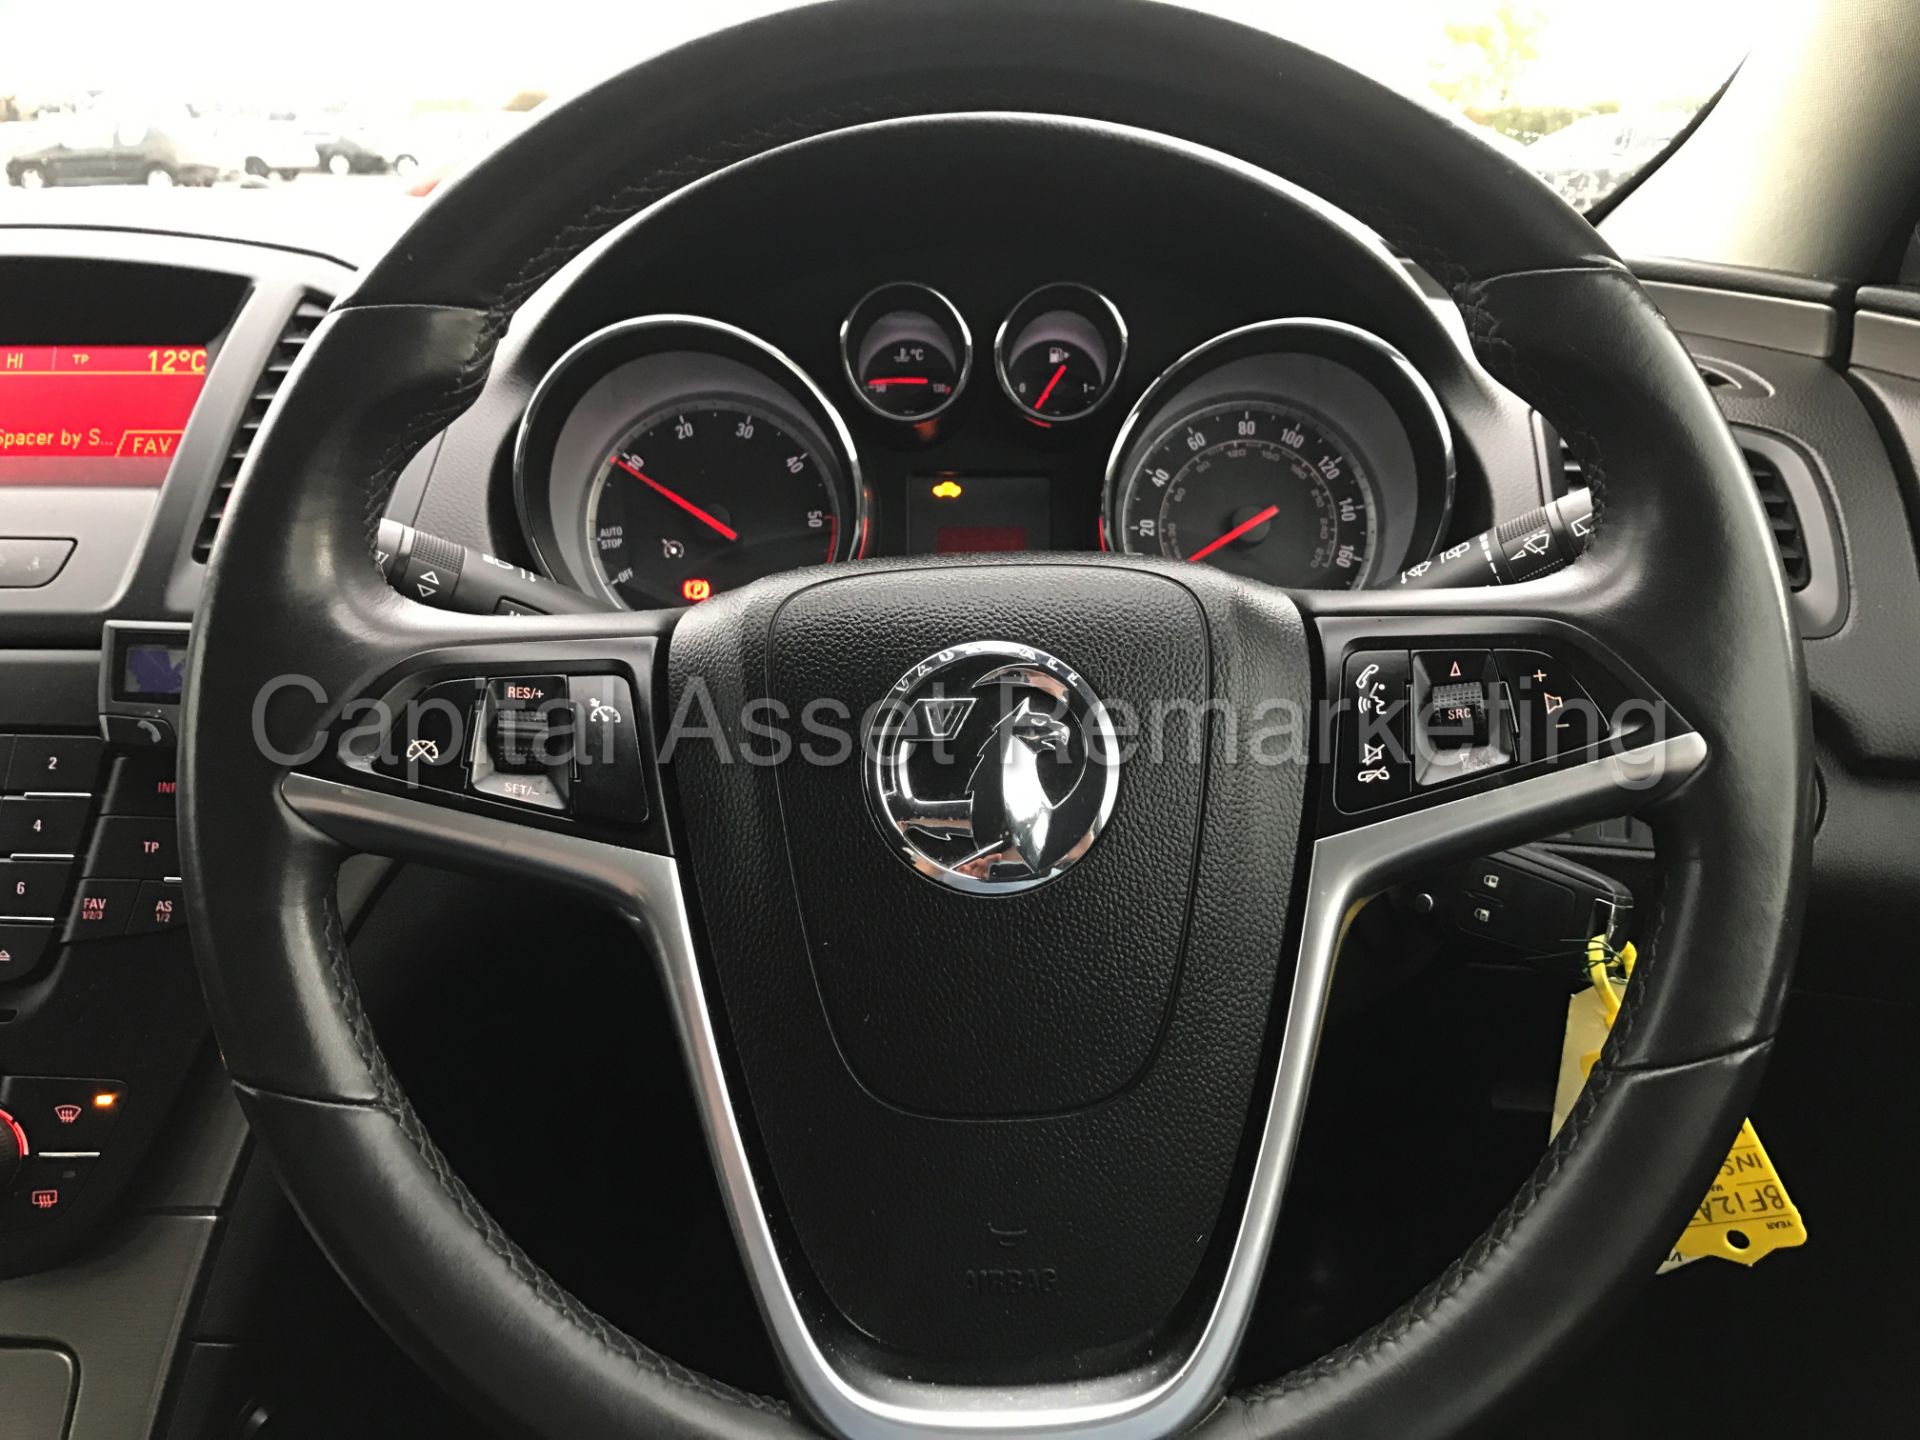 VAUXHALL INSIGNIA 'EXCLUSIVE' (2012) '2.0 CDTI - 6 SPEED - STOP/START - AIR CON' *1 FORMER KEEPER* - Image 11 of 26